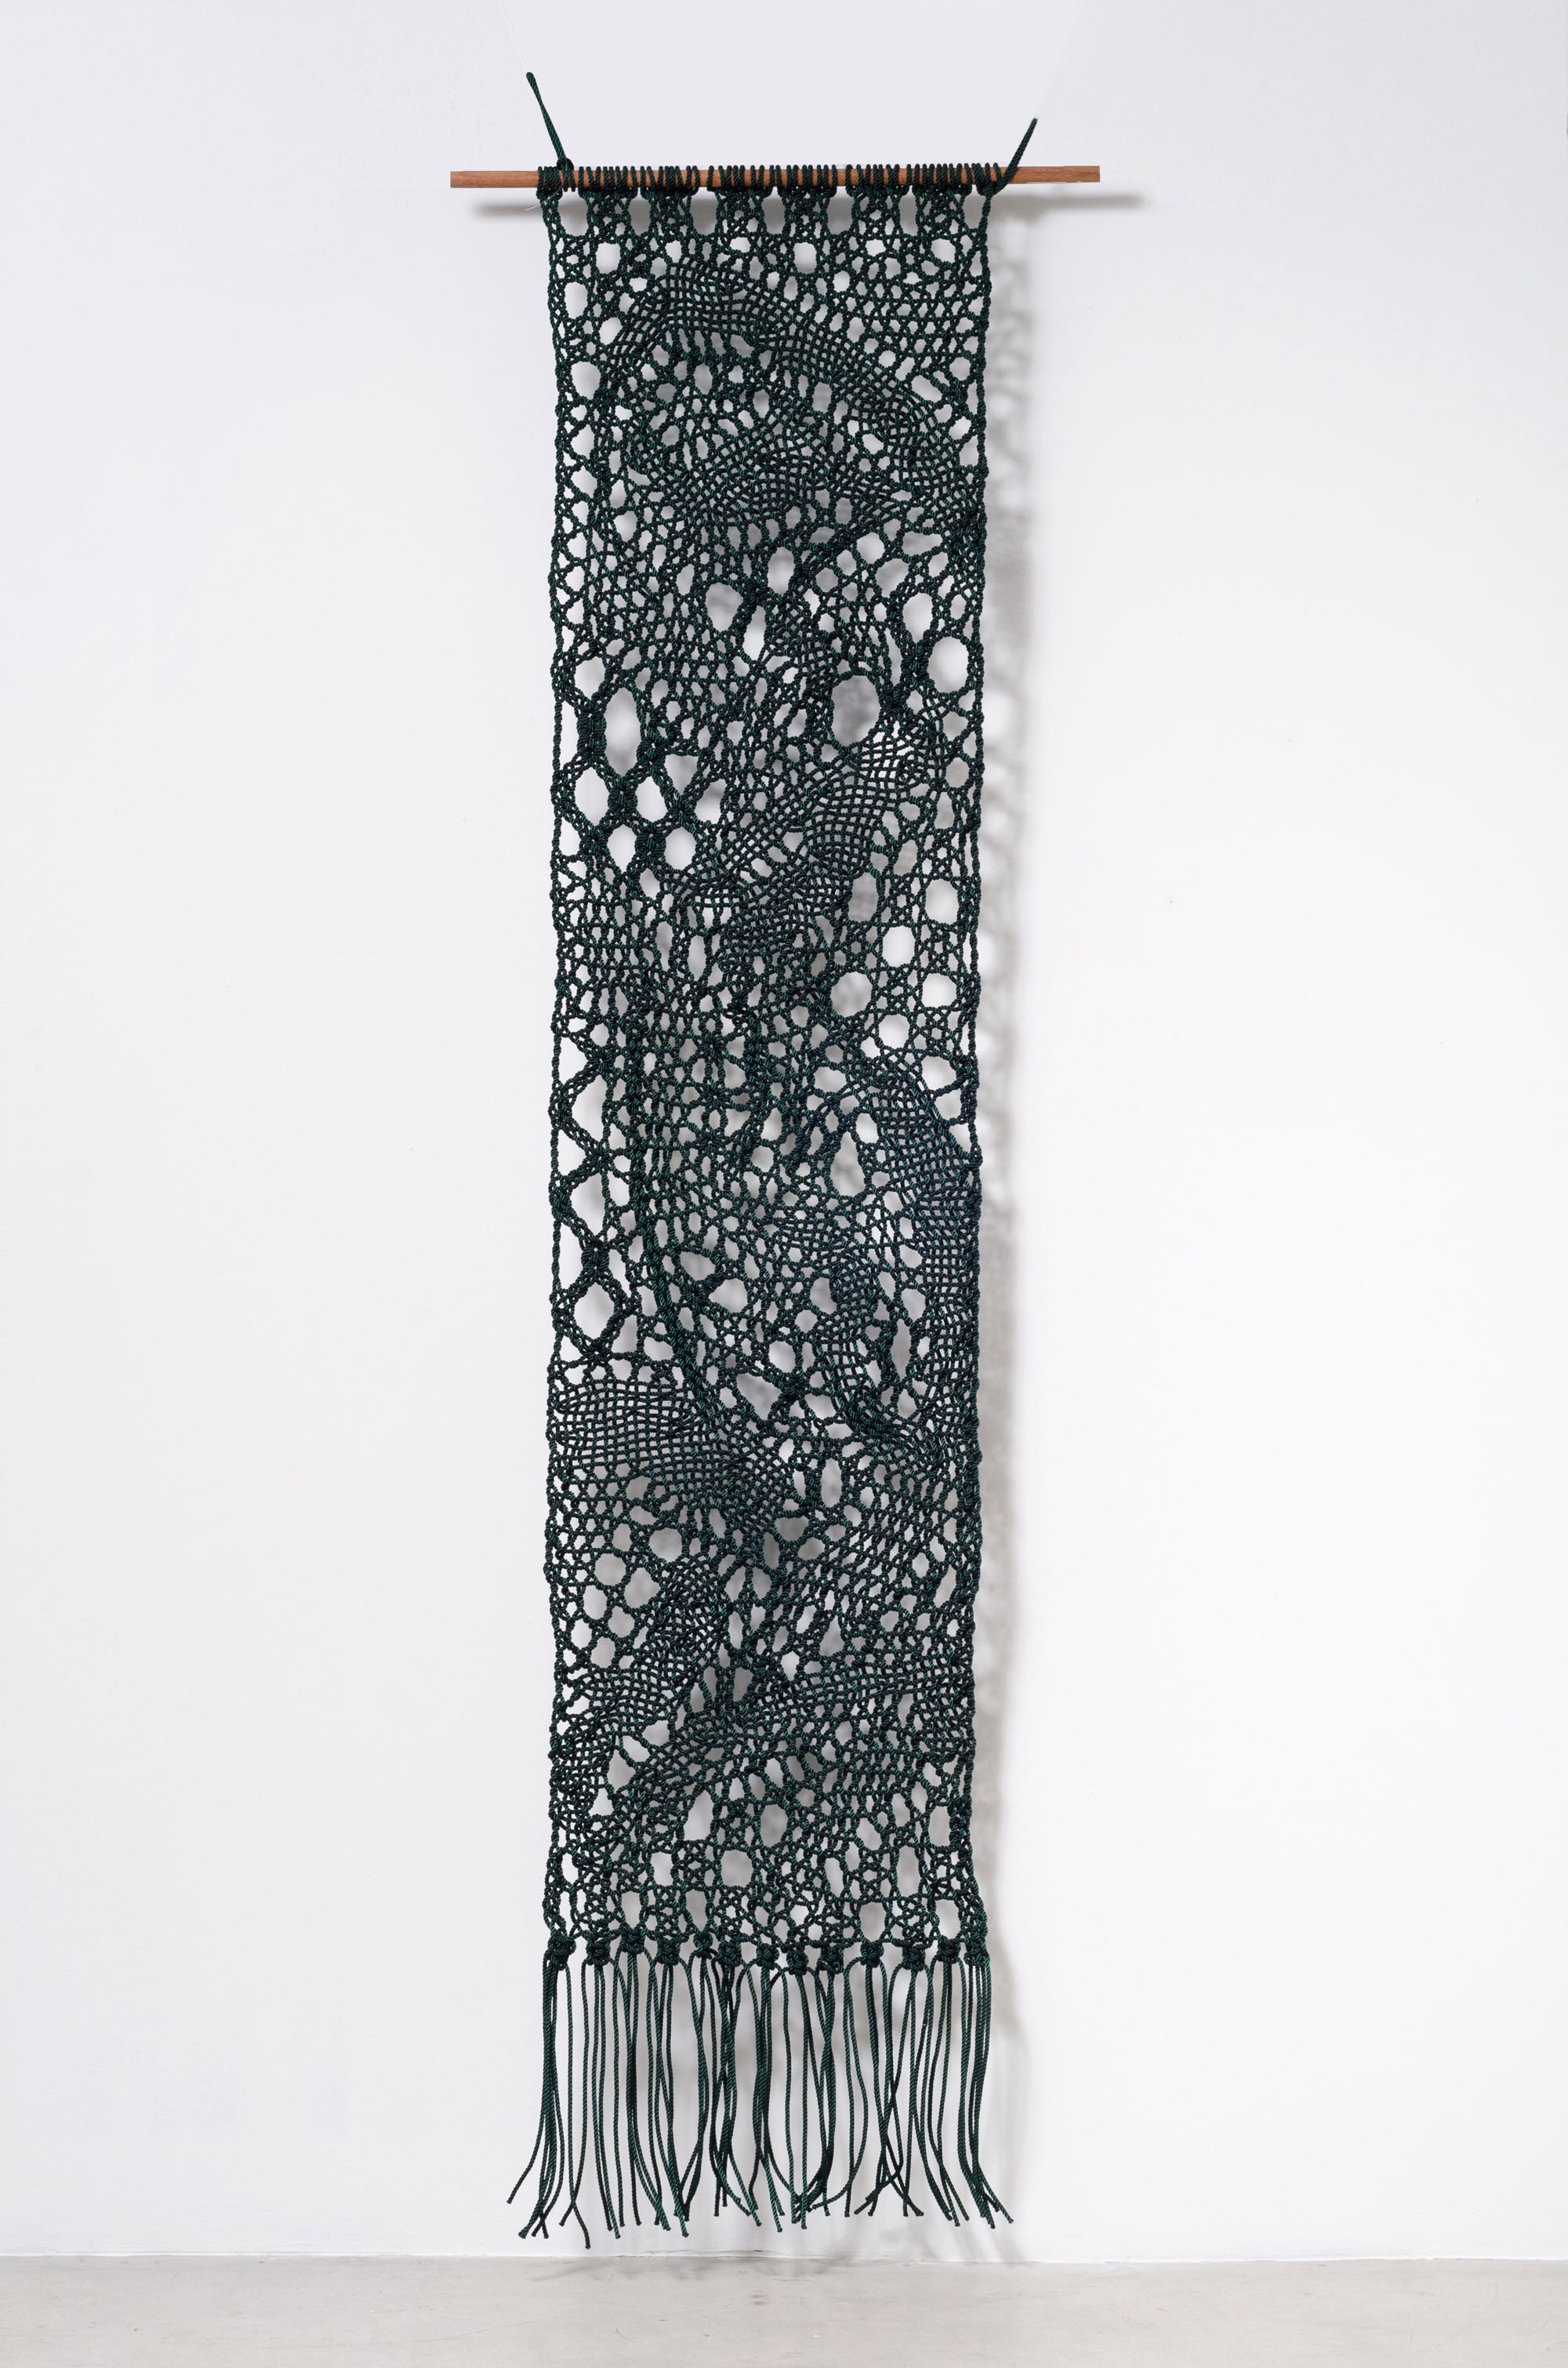 Pierre Fouché. Iemand anders III. 2017. Bobbin lace in 6mm polyester rope. 300 x 66.5 cm. 